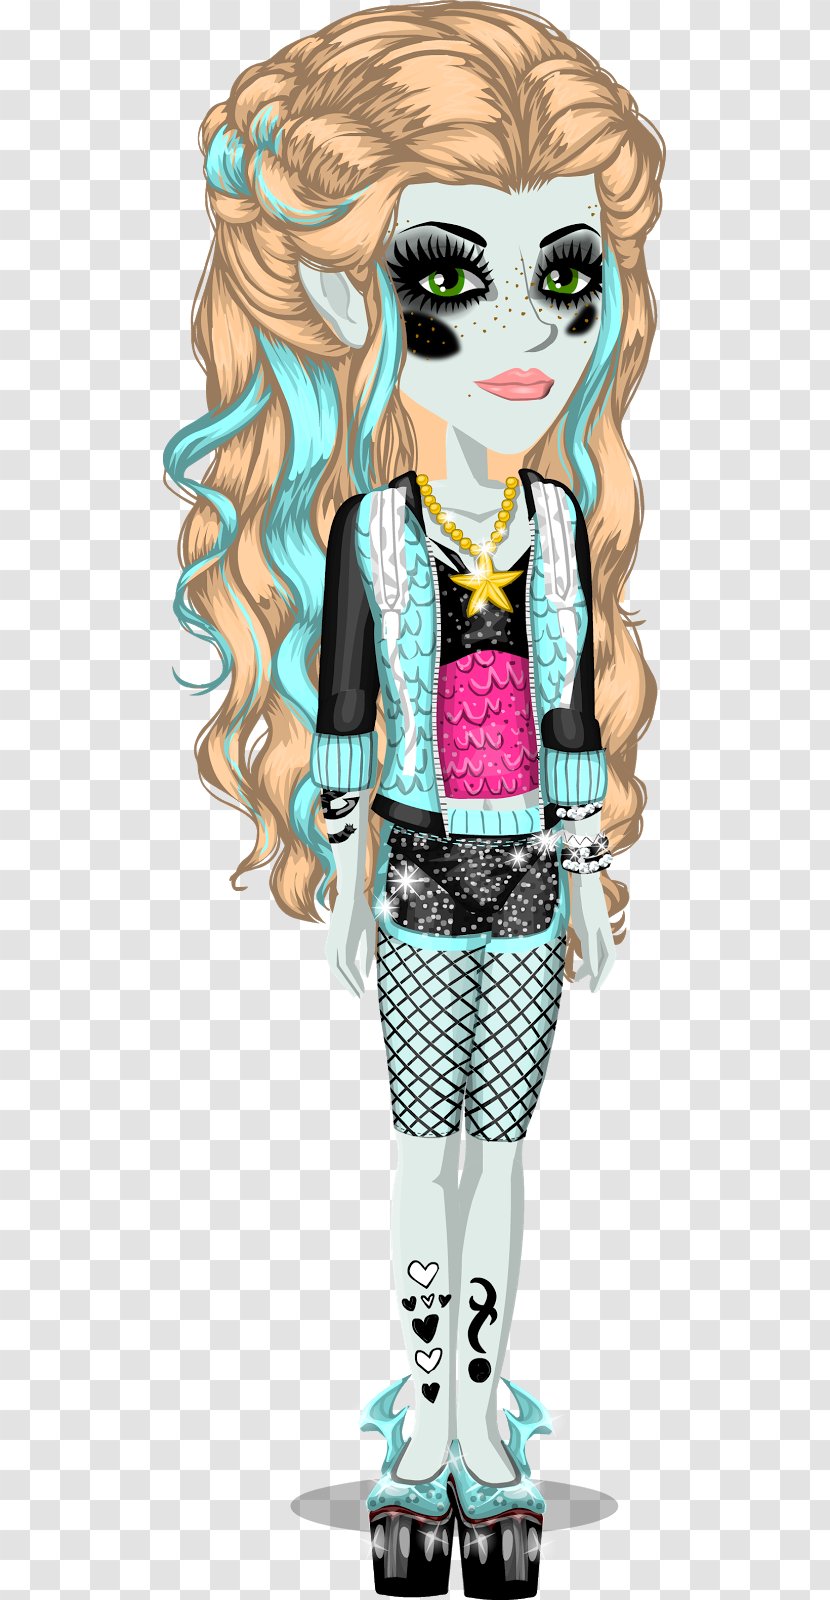 MovieStarPlanet Photography Monster High - Erin Fitzgerald - Girly Transparent PNG